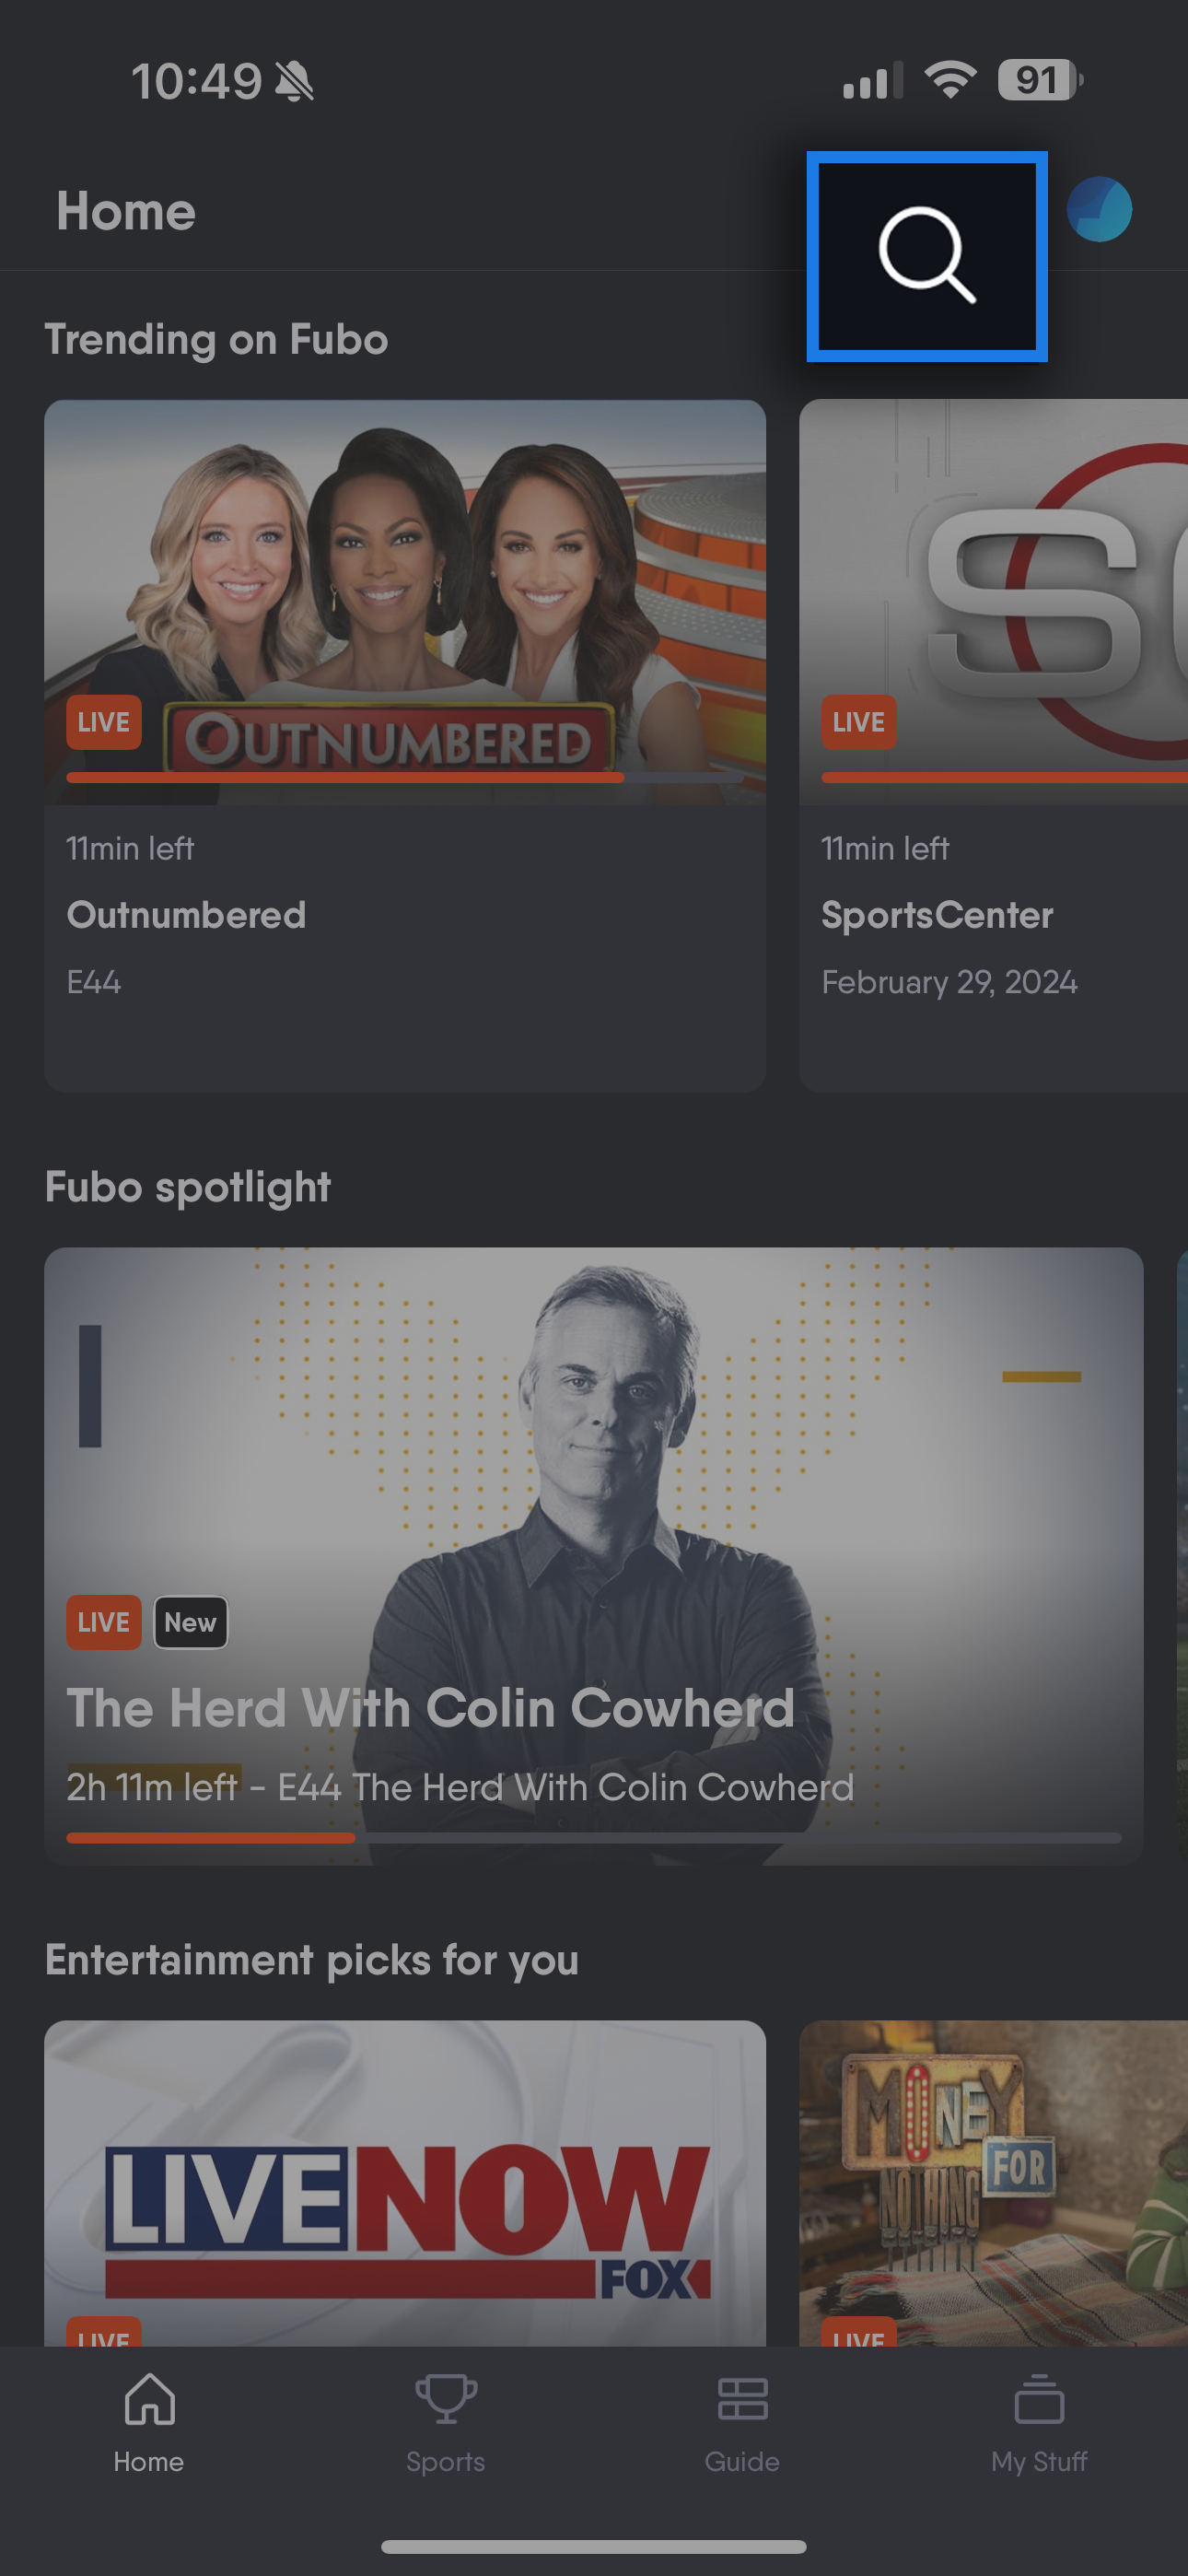 Home screen of the FuboTV app on a mobile device with the SEARCH icon highlighted at the top